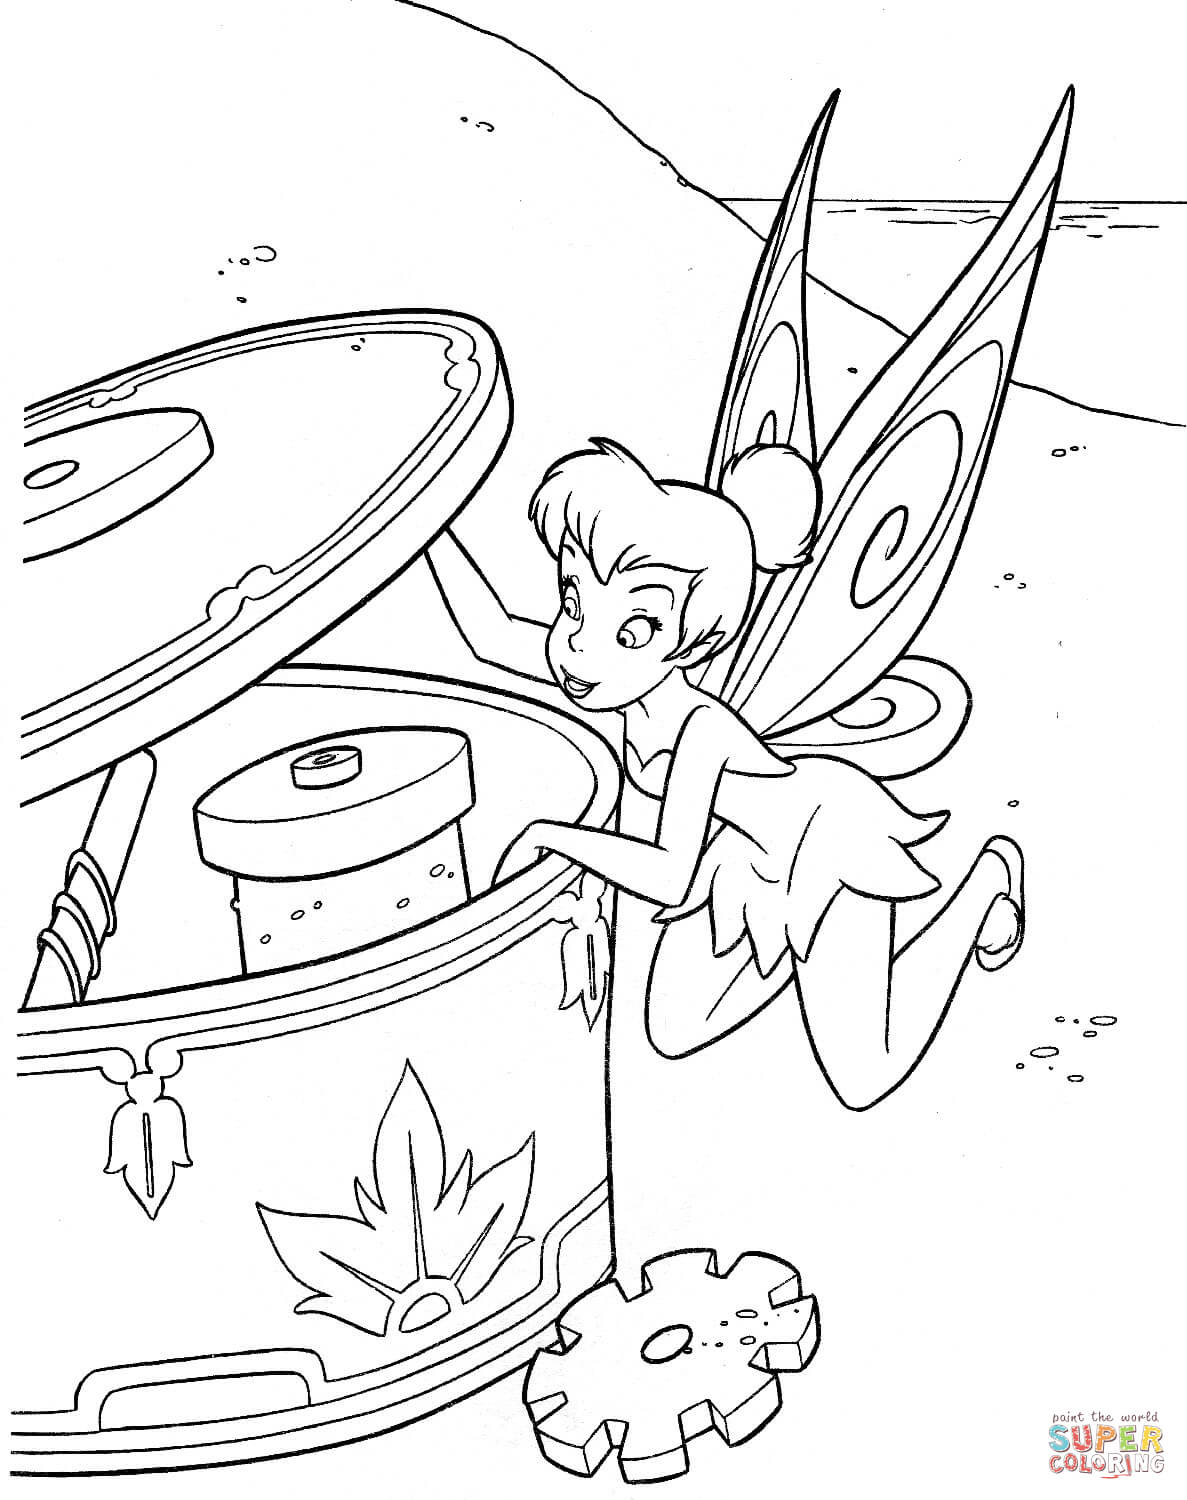 Fairy Queen Coloring Pages Disney Fairies Coloring Pages Free Coloring Pages